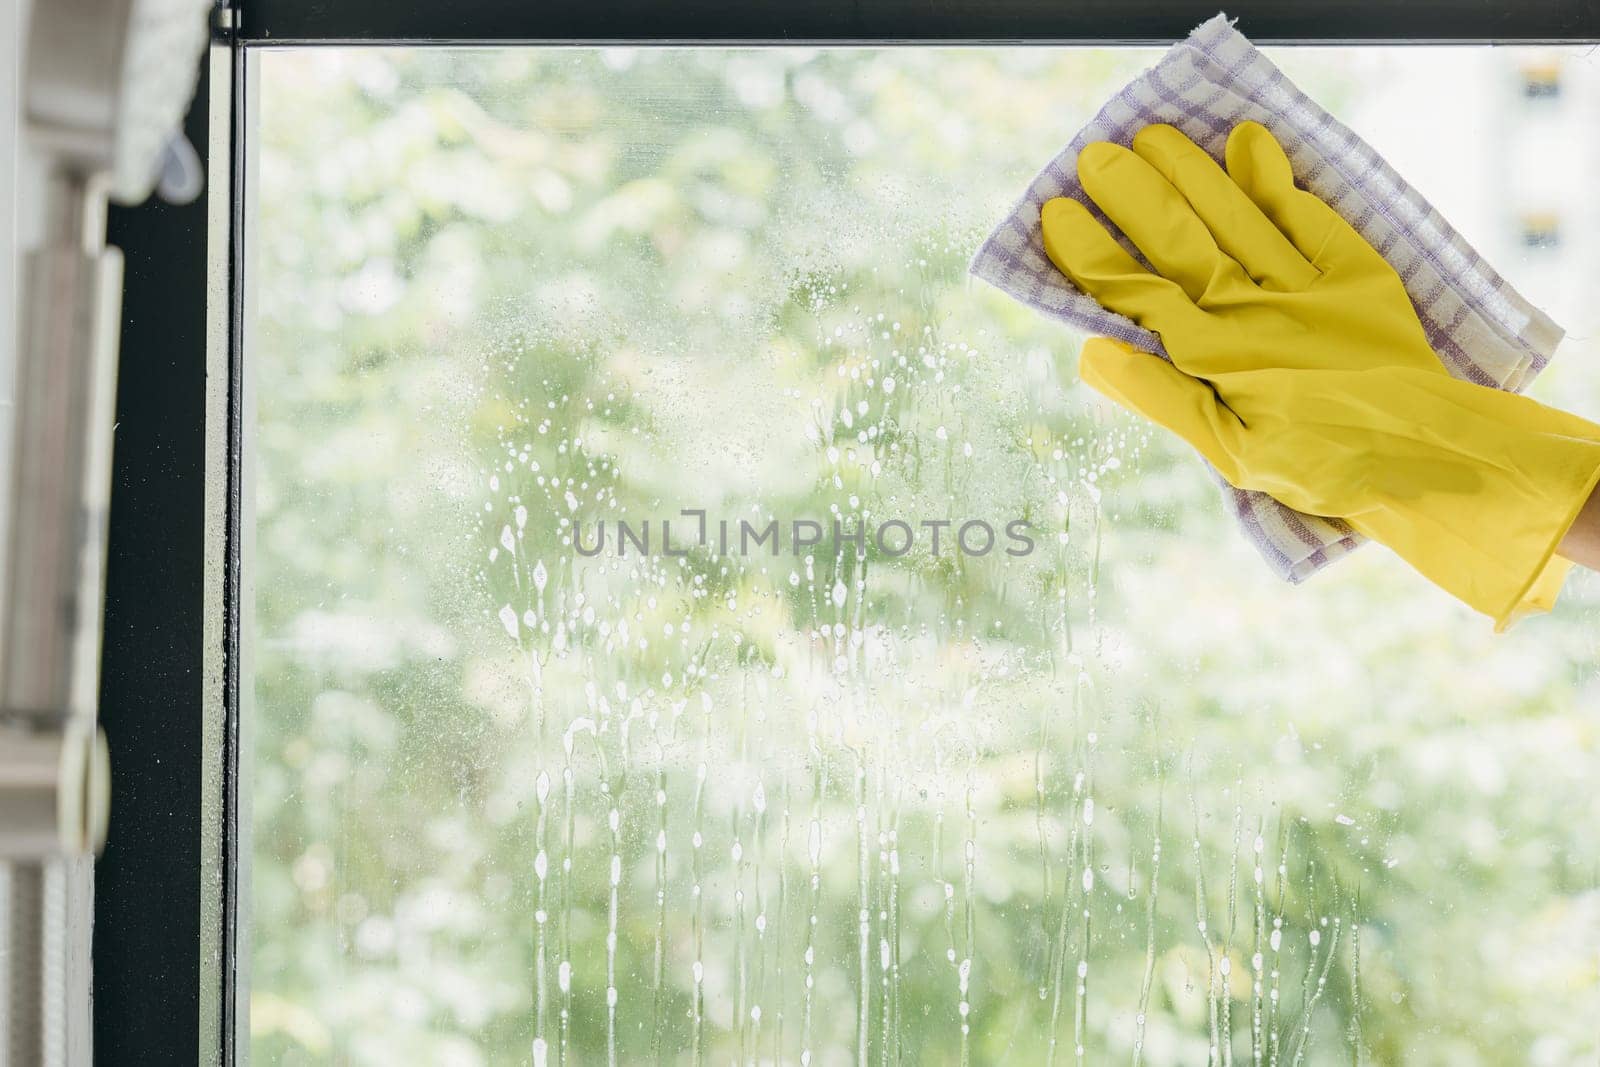 With happiness a young woman maid sprays and wipes office windows. Her housework routine emphasizes purity hygiene and transparent cleanliness for sparkling windows. by Sorapop